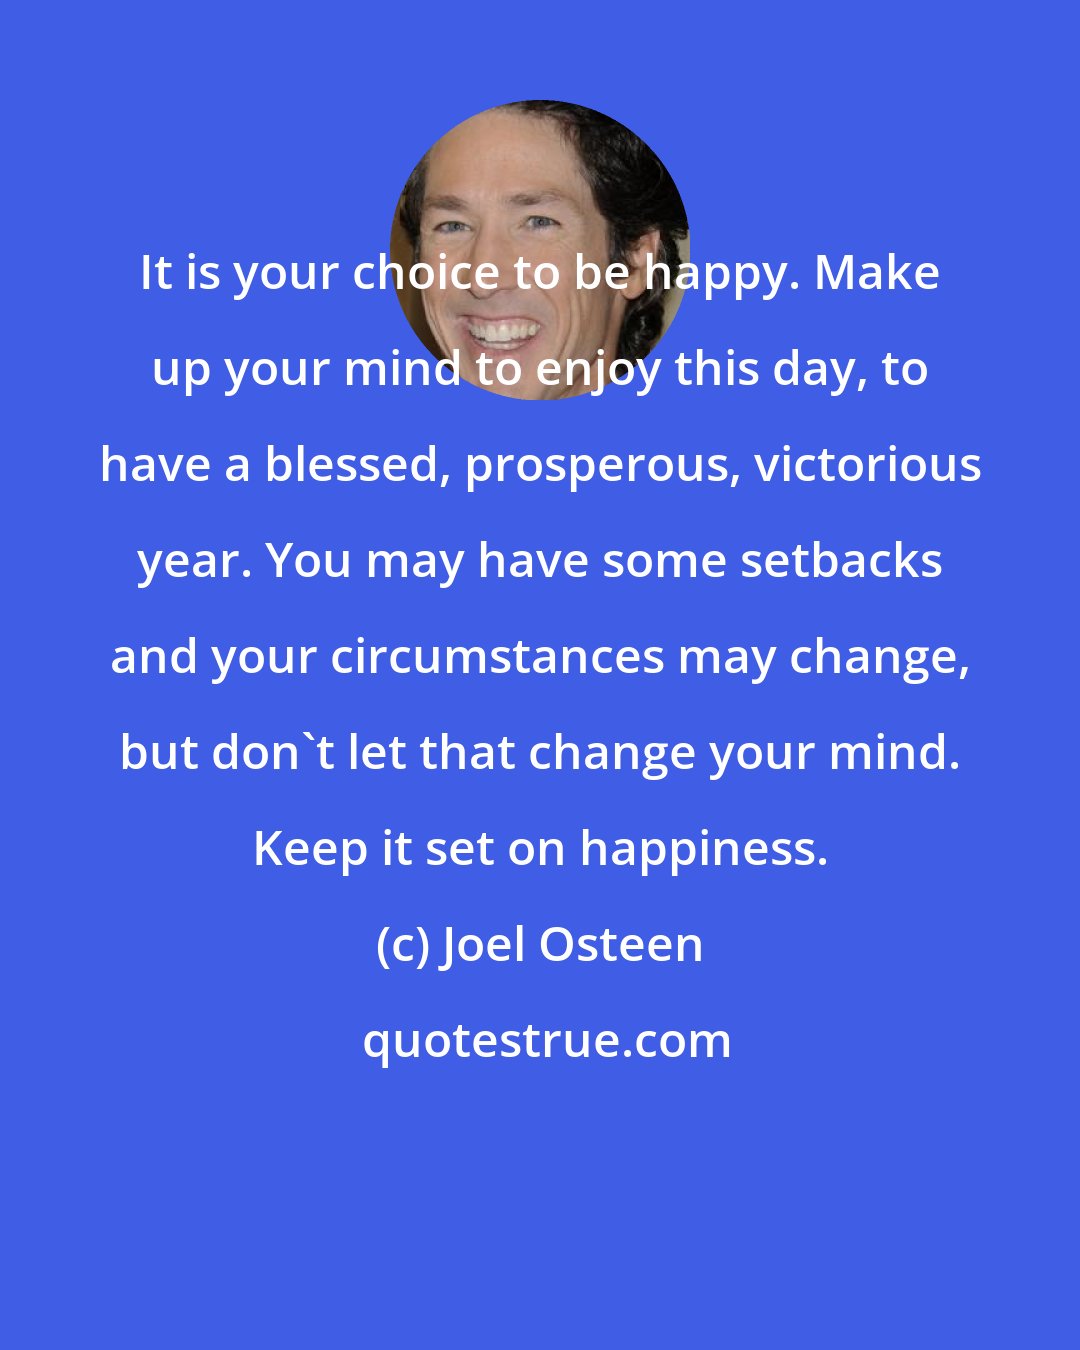 Joel Osteen: It is your choice to be happy. Make up your mind to enjoy this day, to have a blessed, prosperous, victorious year. You may have some setbacks and your circumstances may change, but don't let that change your mind. Keep it set on happiness.